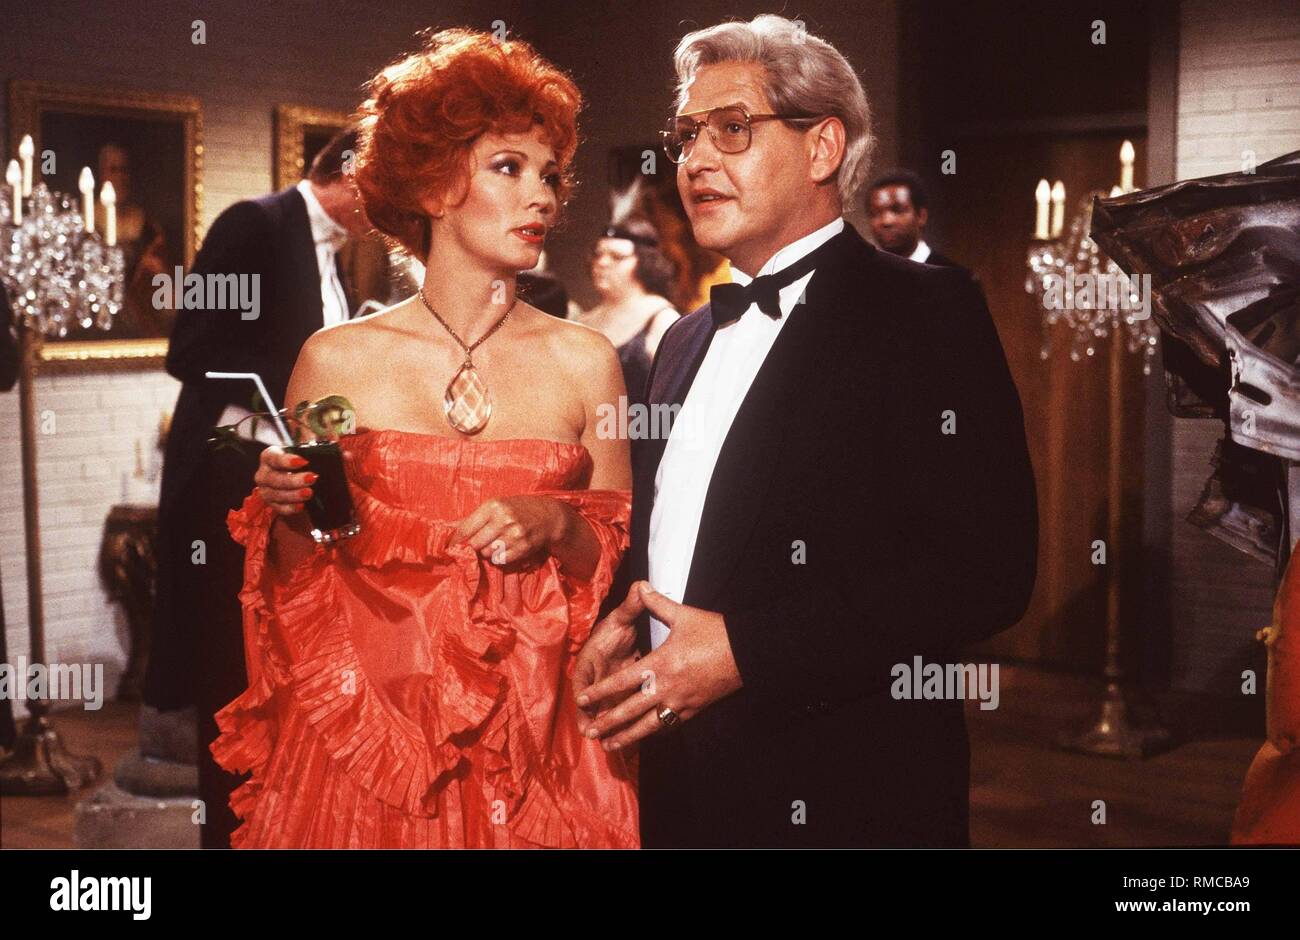 Diether Krebs and Iris Berben in the comedy show 'Sketchup' Stock Photo